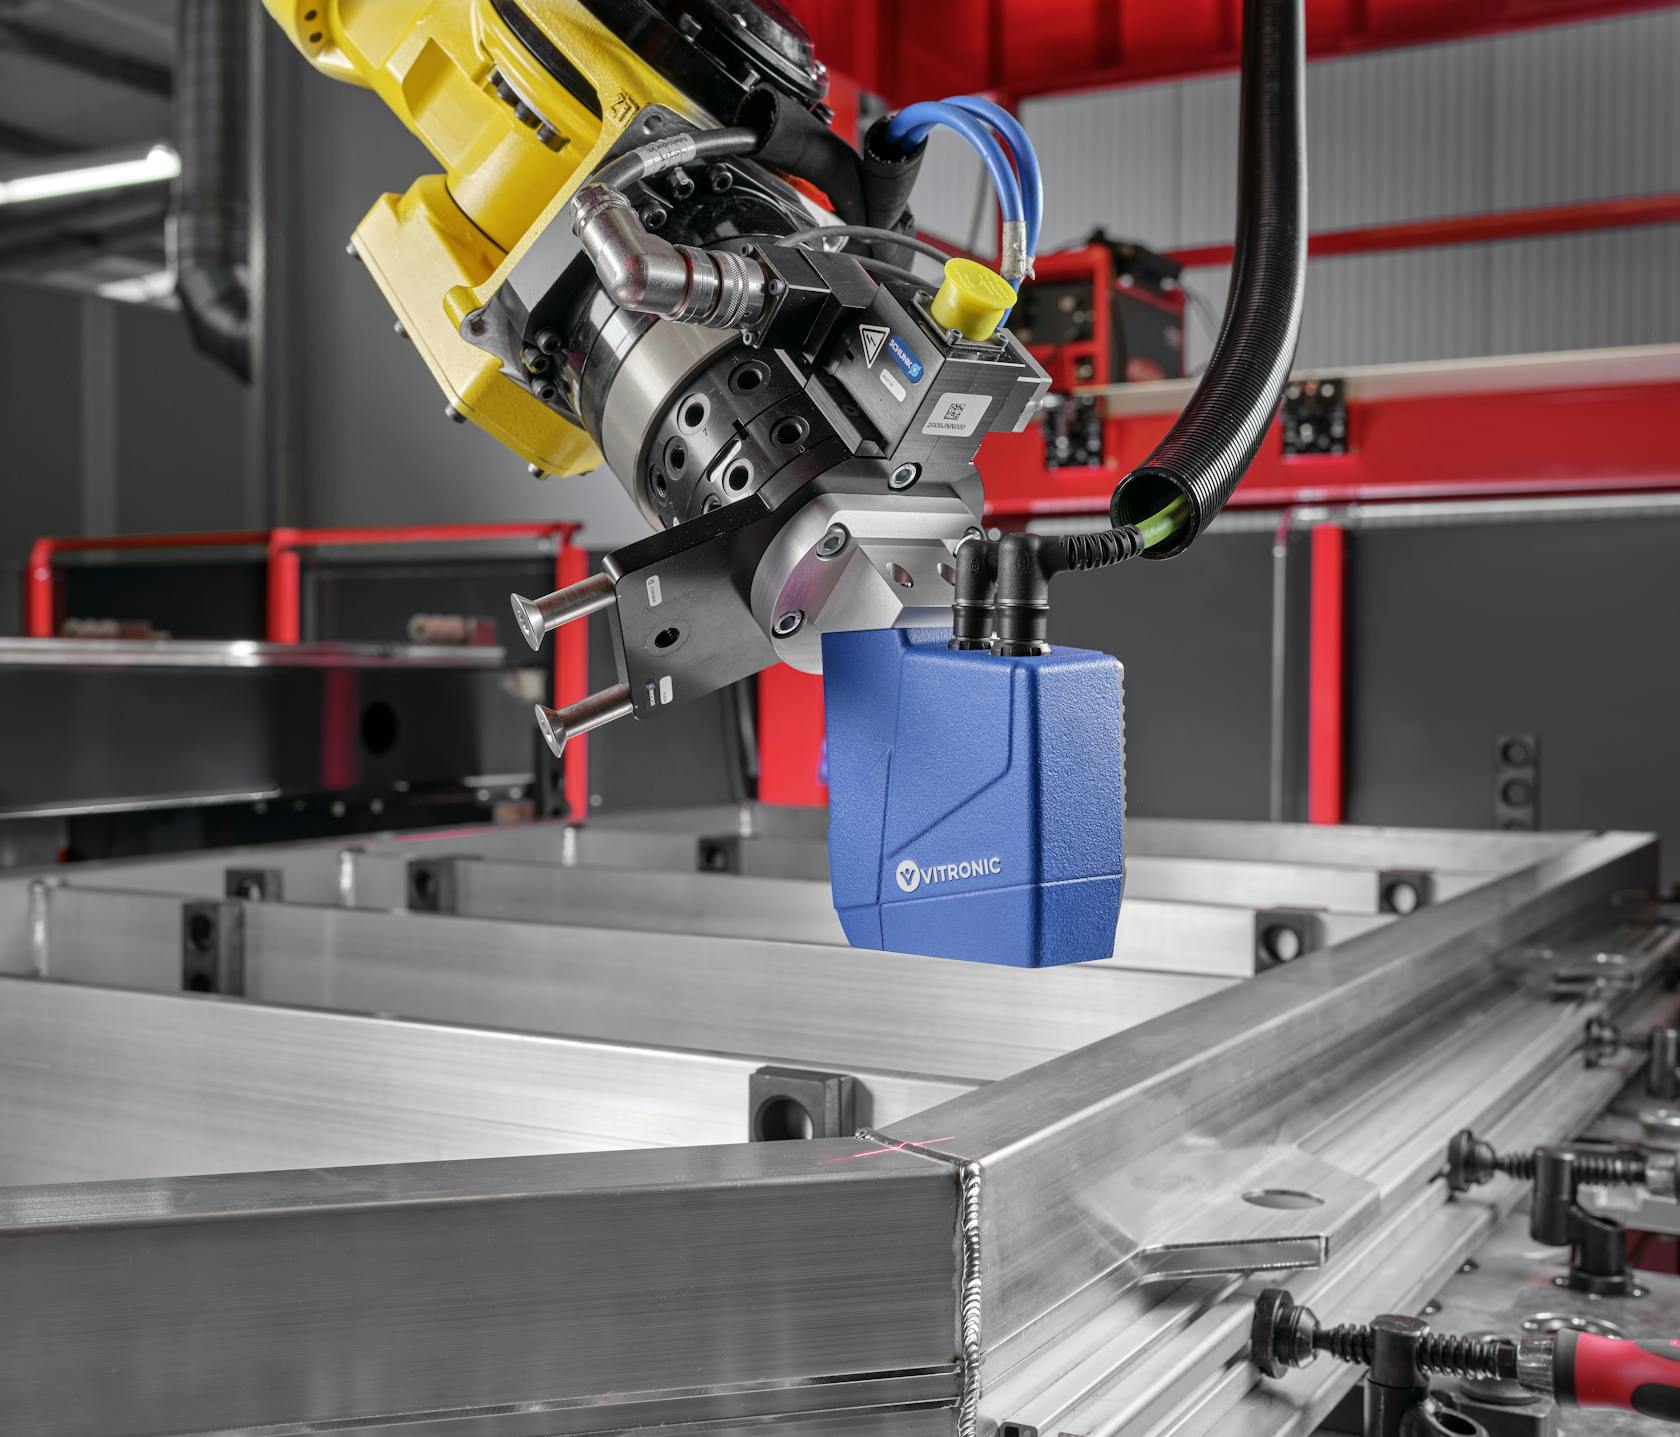 VIRO WSI: Automated weld seam inspection for battery boxes of electric cars